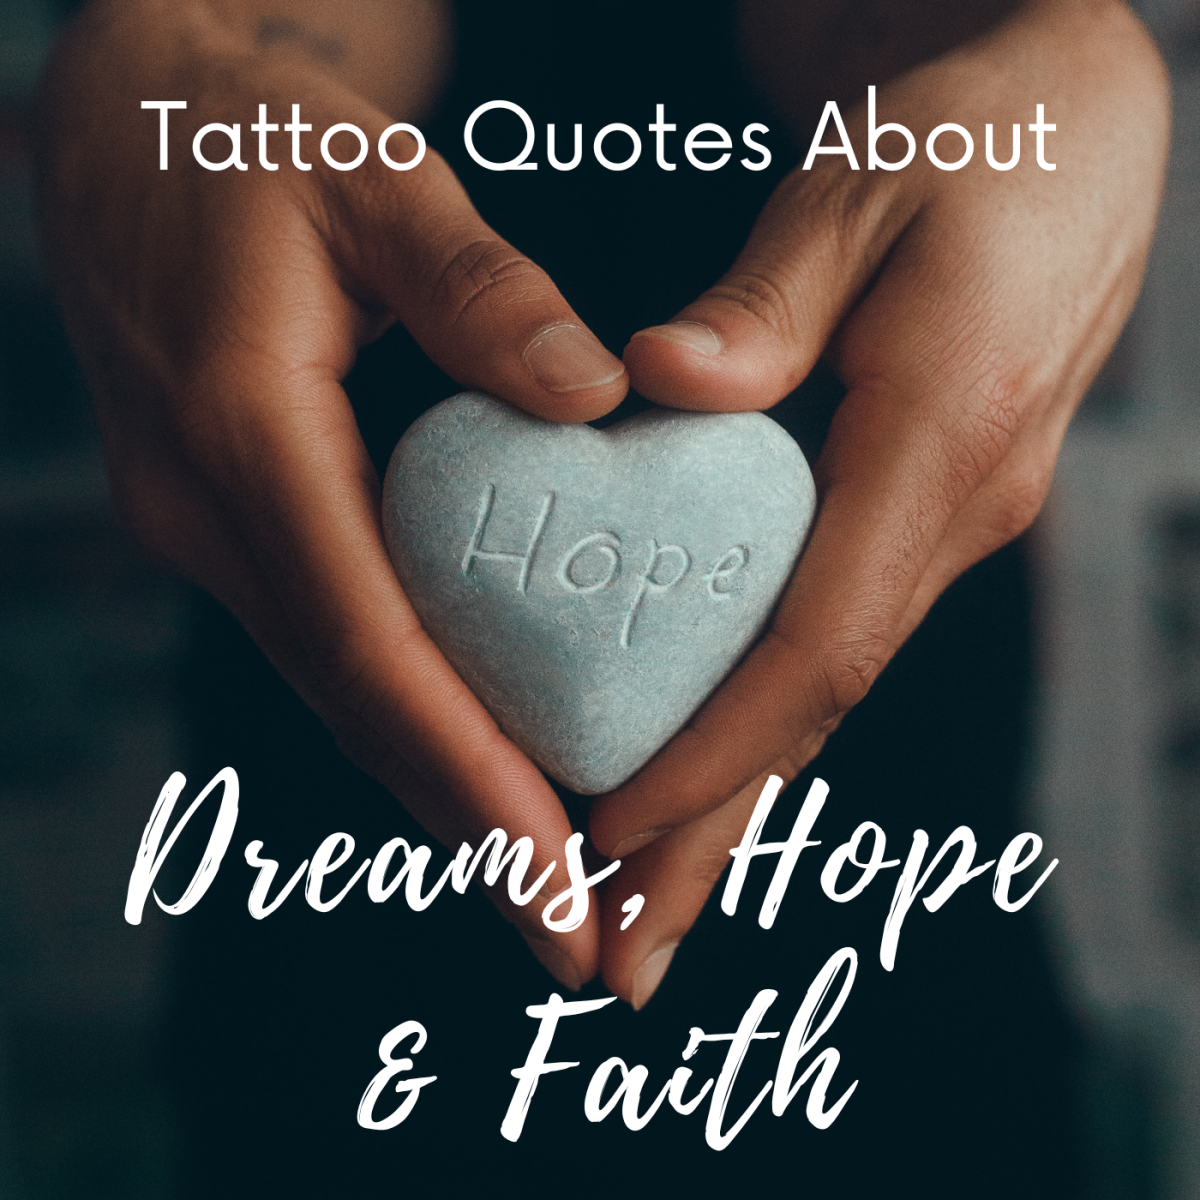 Tattoo Ideas: Quotes on Dreams, Hope, and Belief